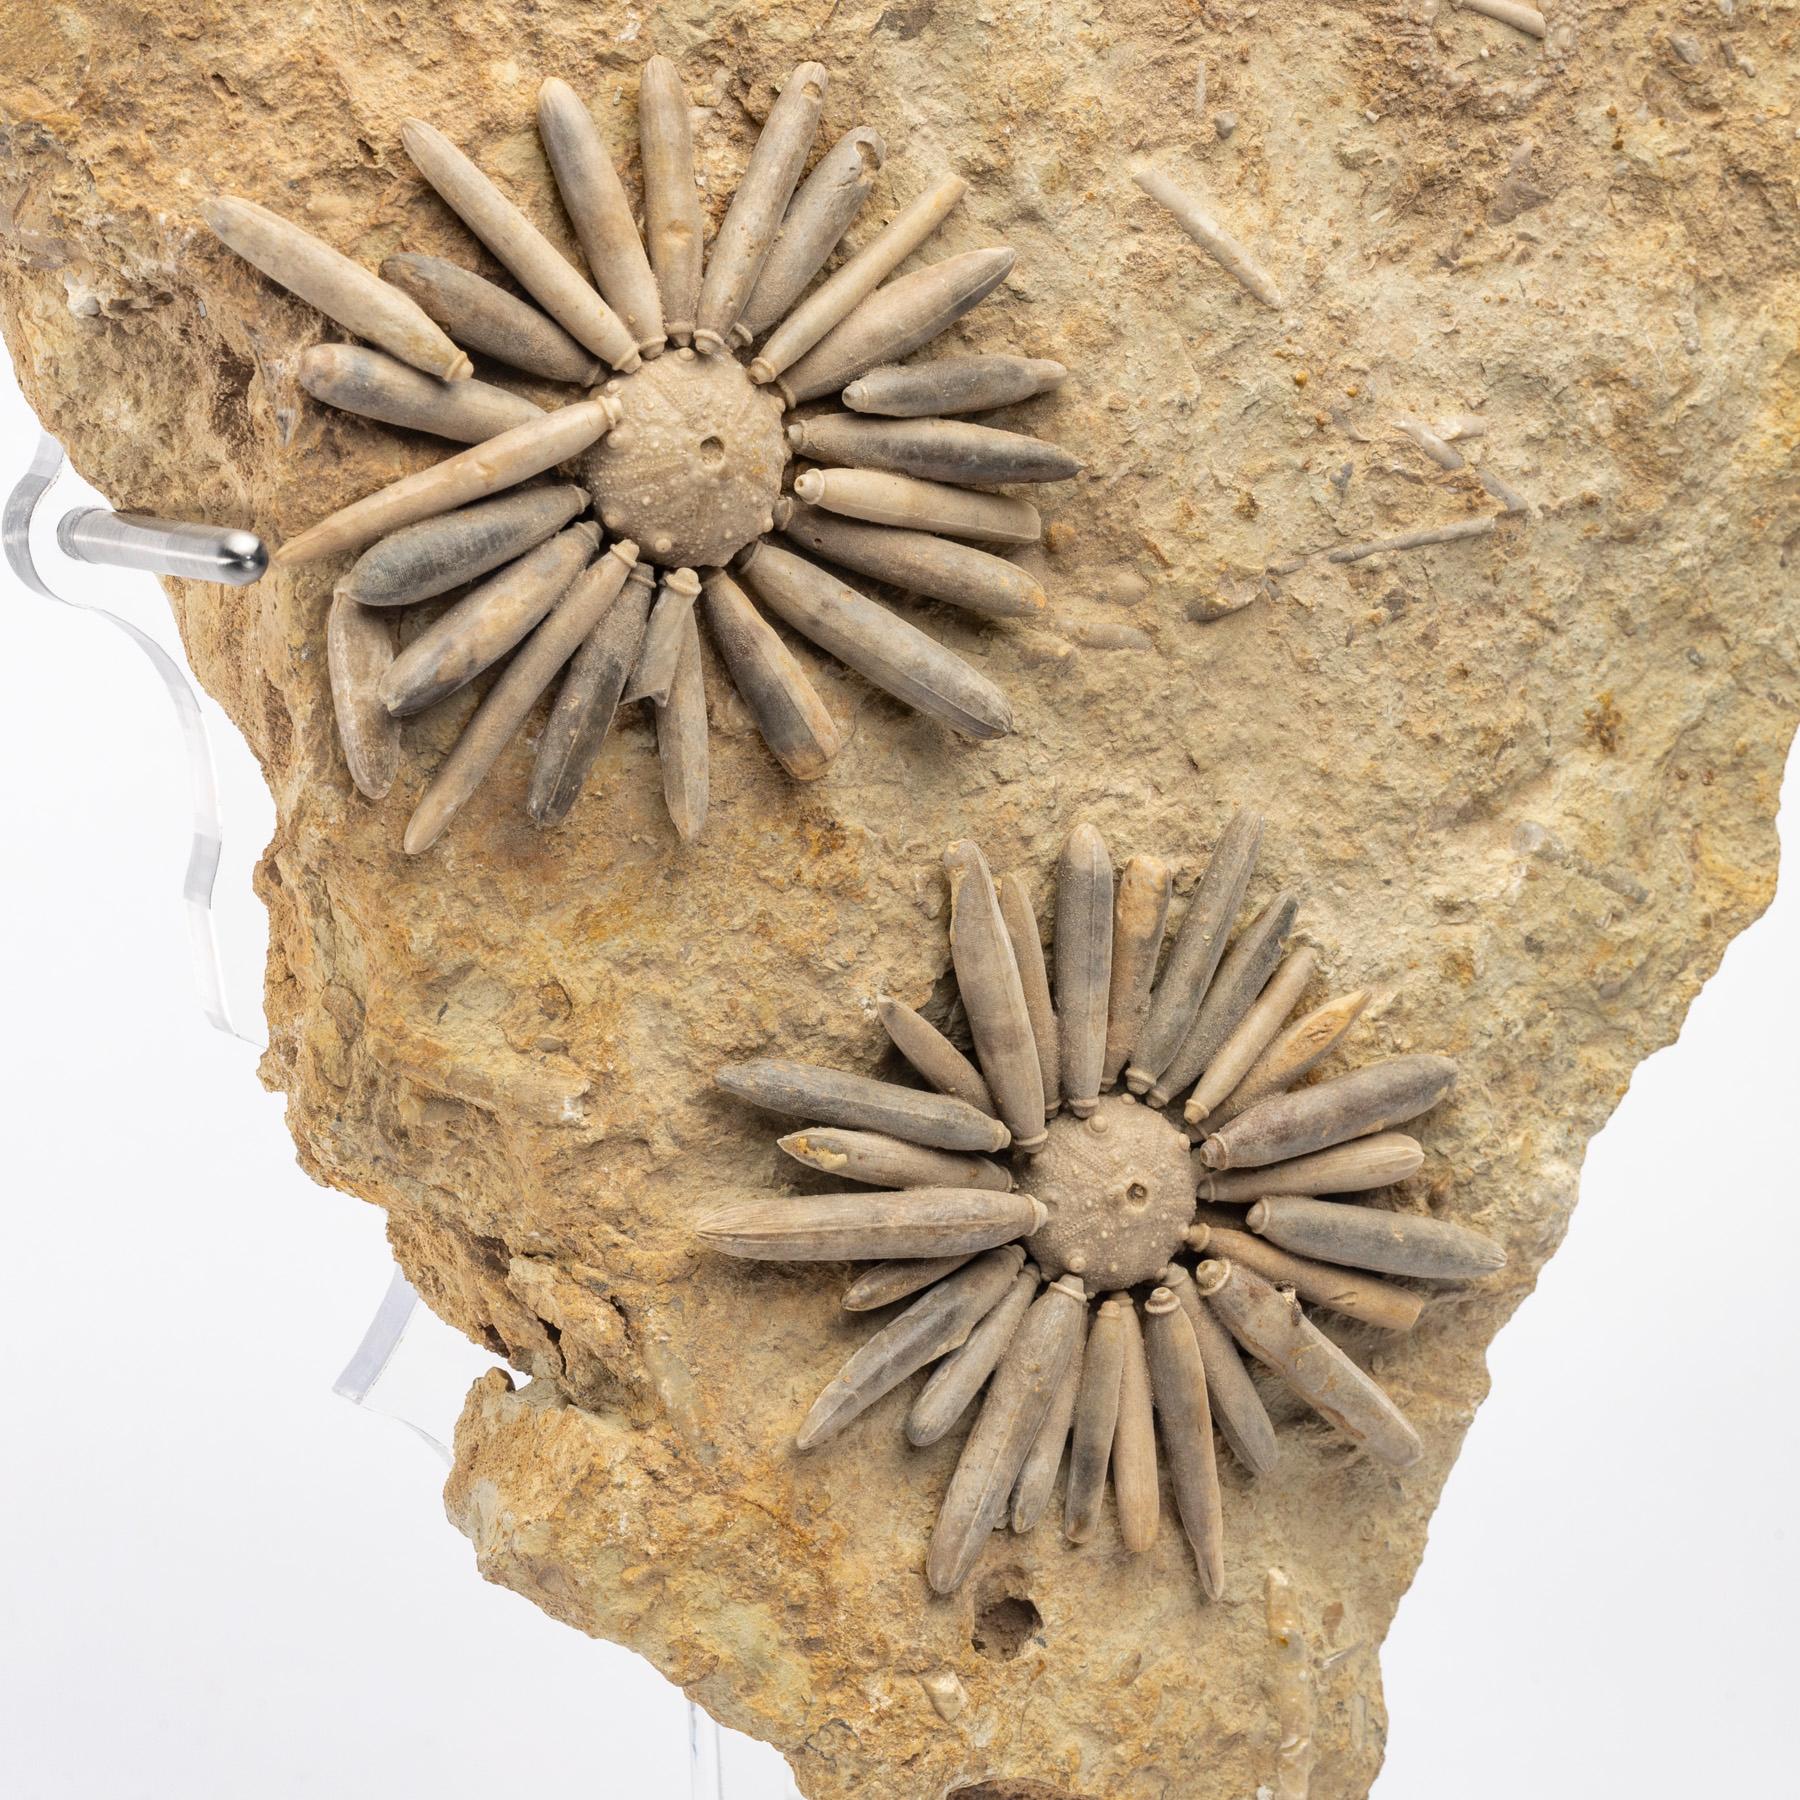 Mexican Fossil Sea Urchin from Morocco, Early Jurassic '170 Million Years Old'